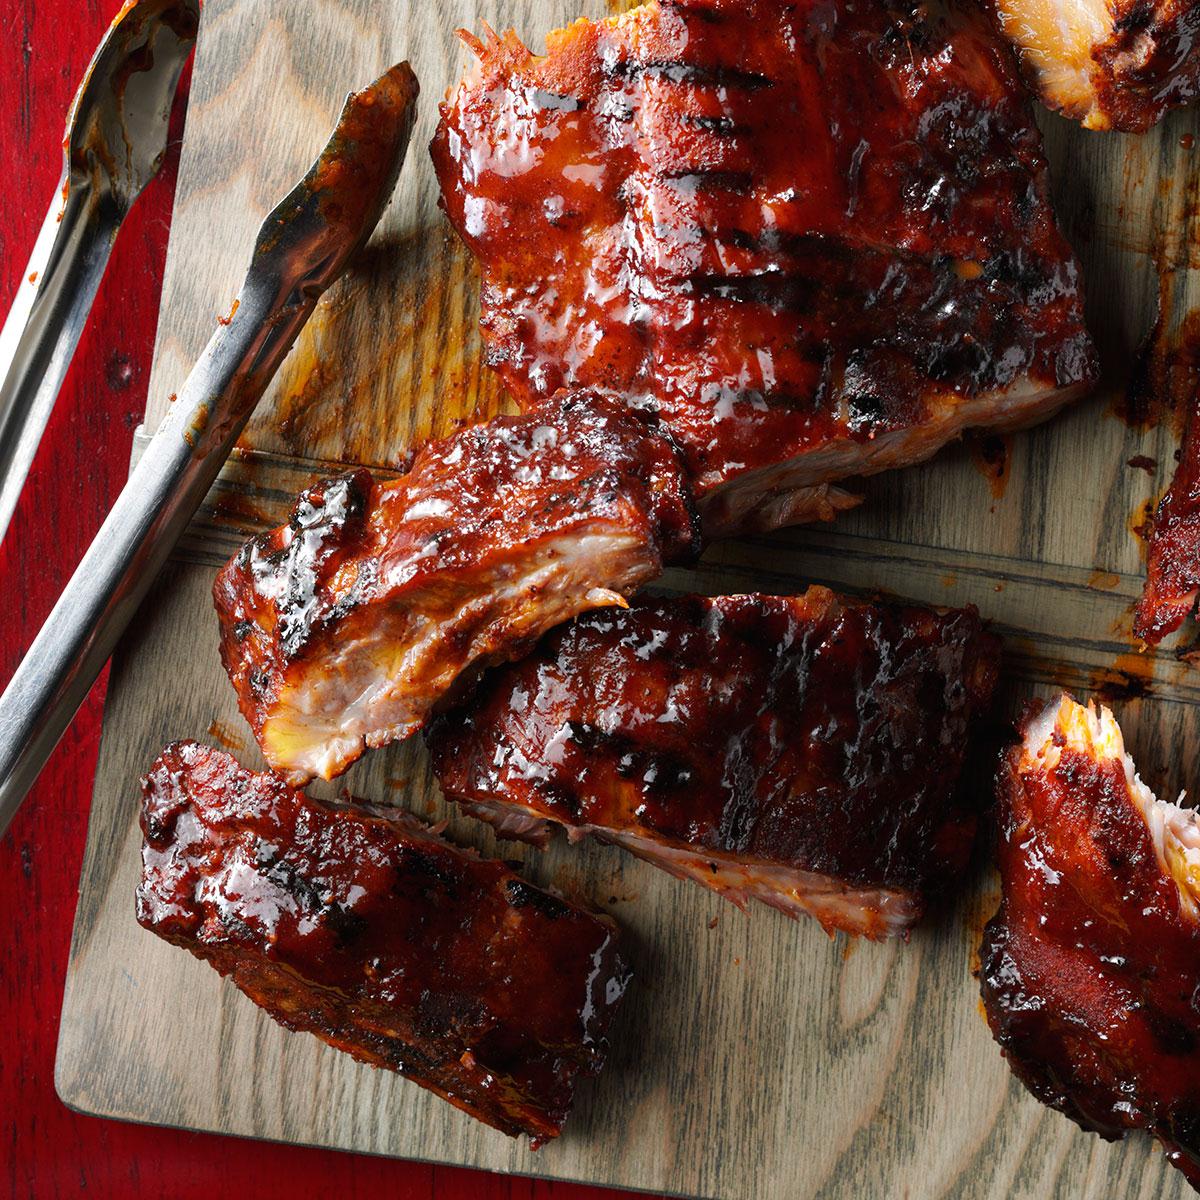 Big John S Chili Rubbed Ribs Recipe Taste Of Home,What To Wear At A Funeral Men